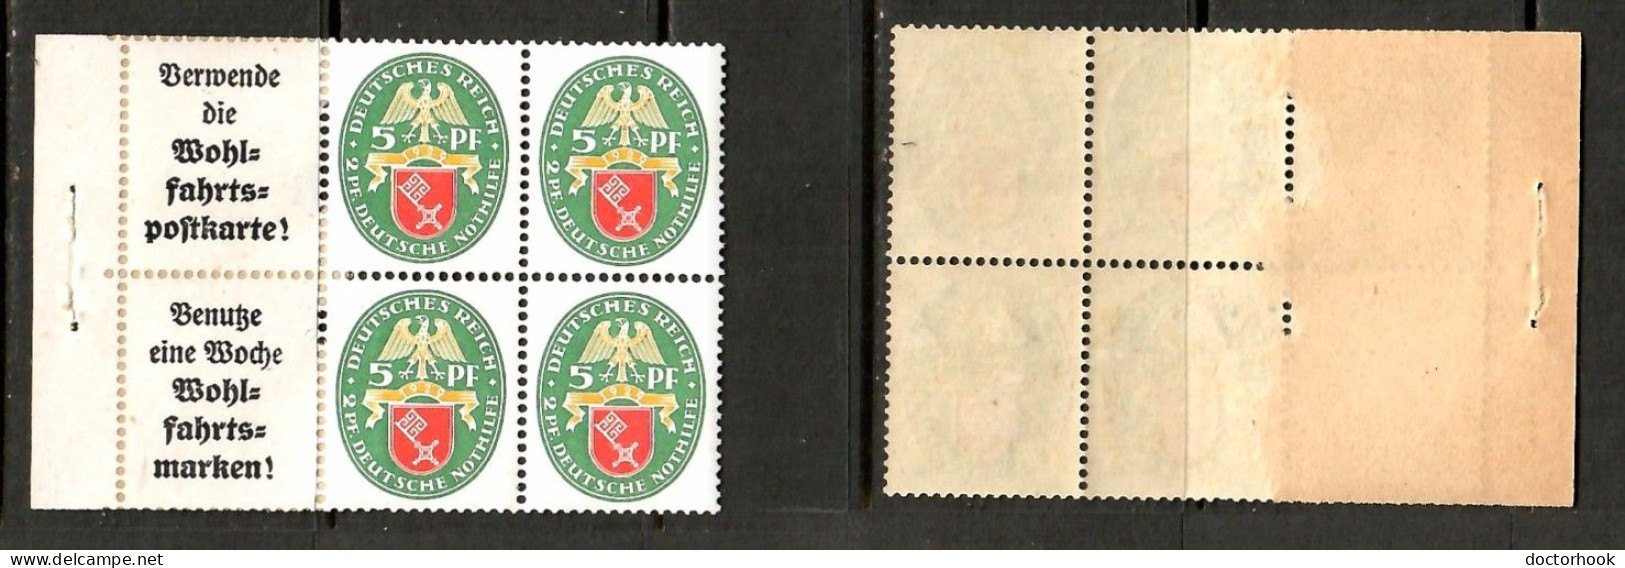 GERMANY   Scott # B 28* MINT OG BOOKLET PANE Of 4 + 2 LABELS (PAPER ADHESION)  (CONDITION AS PER SCAN) (LG-1764) - Booklets & Se-tenant